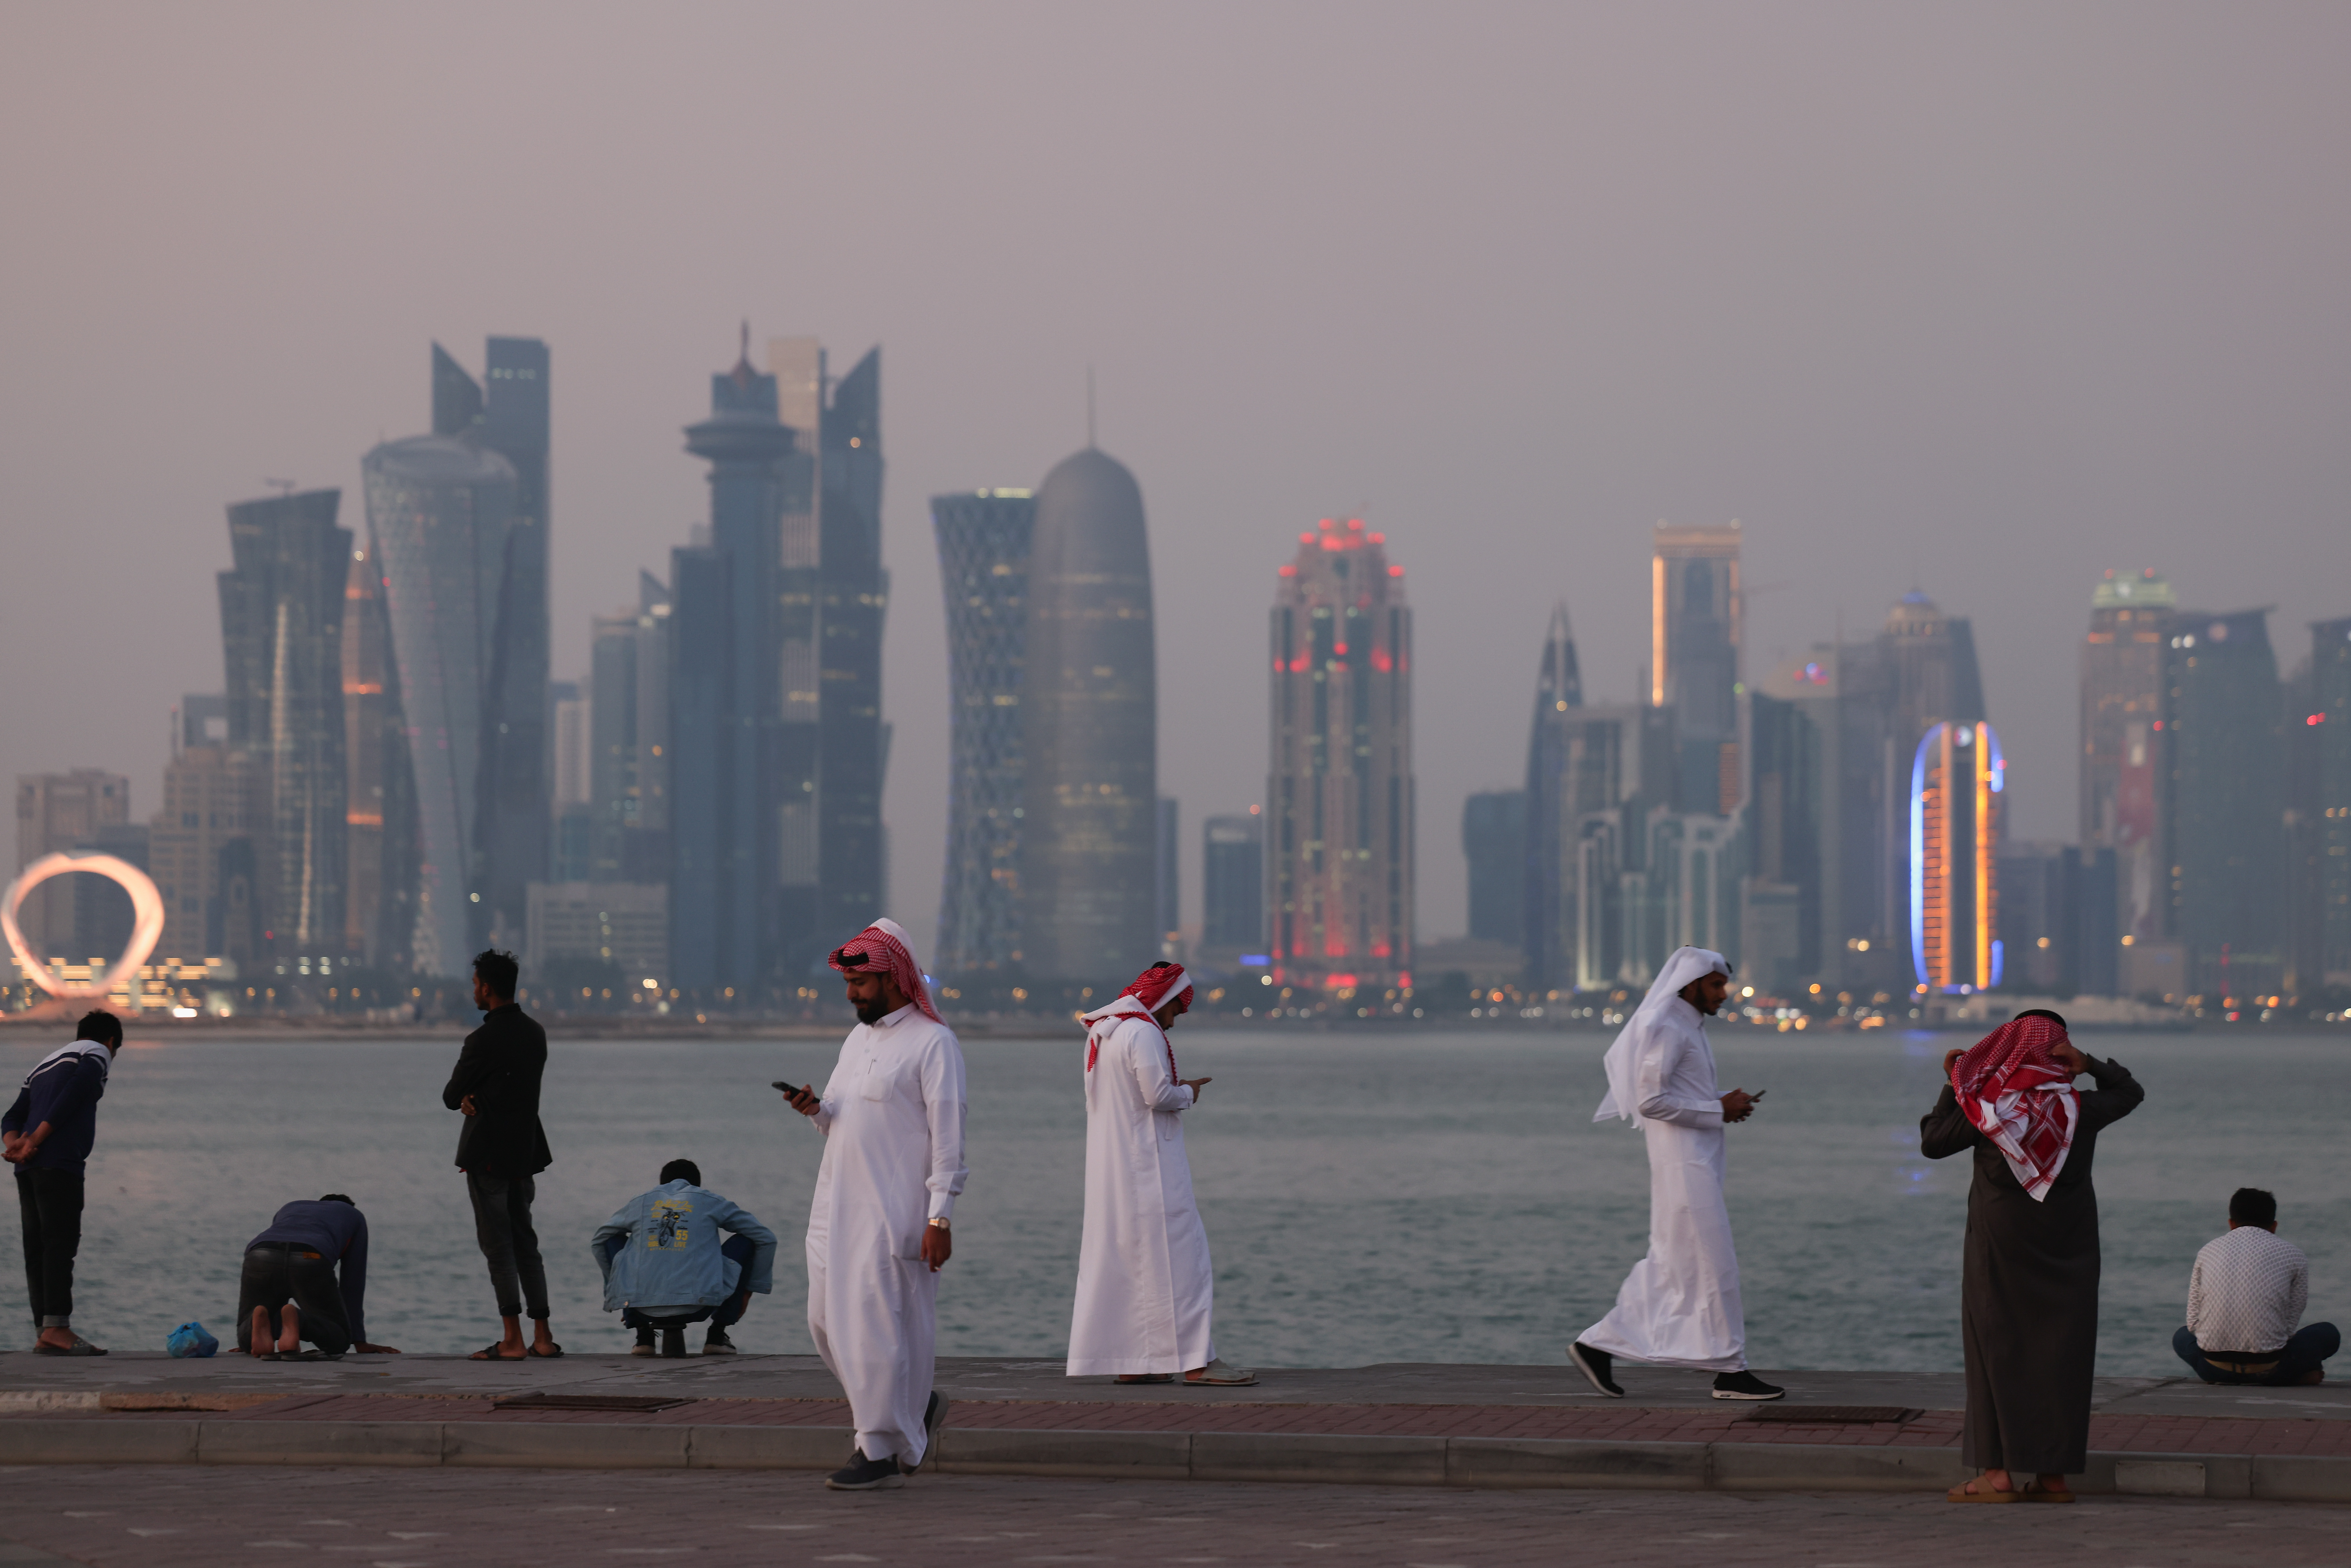 People gather at the Corniche promenade in Doha, which will host Web Summit Qatar this week. (Photo: Getty Images)